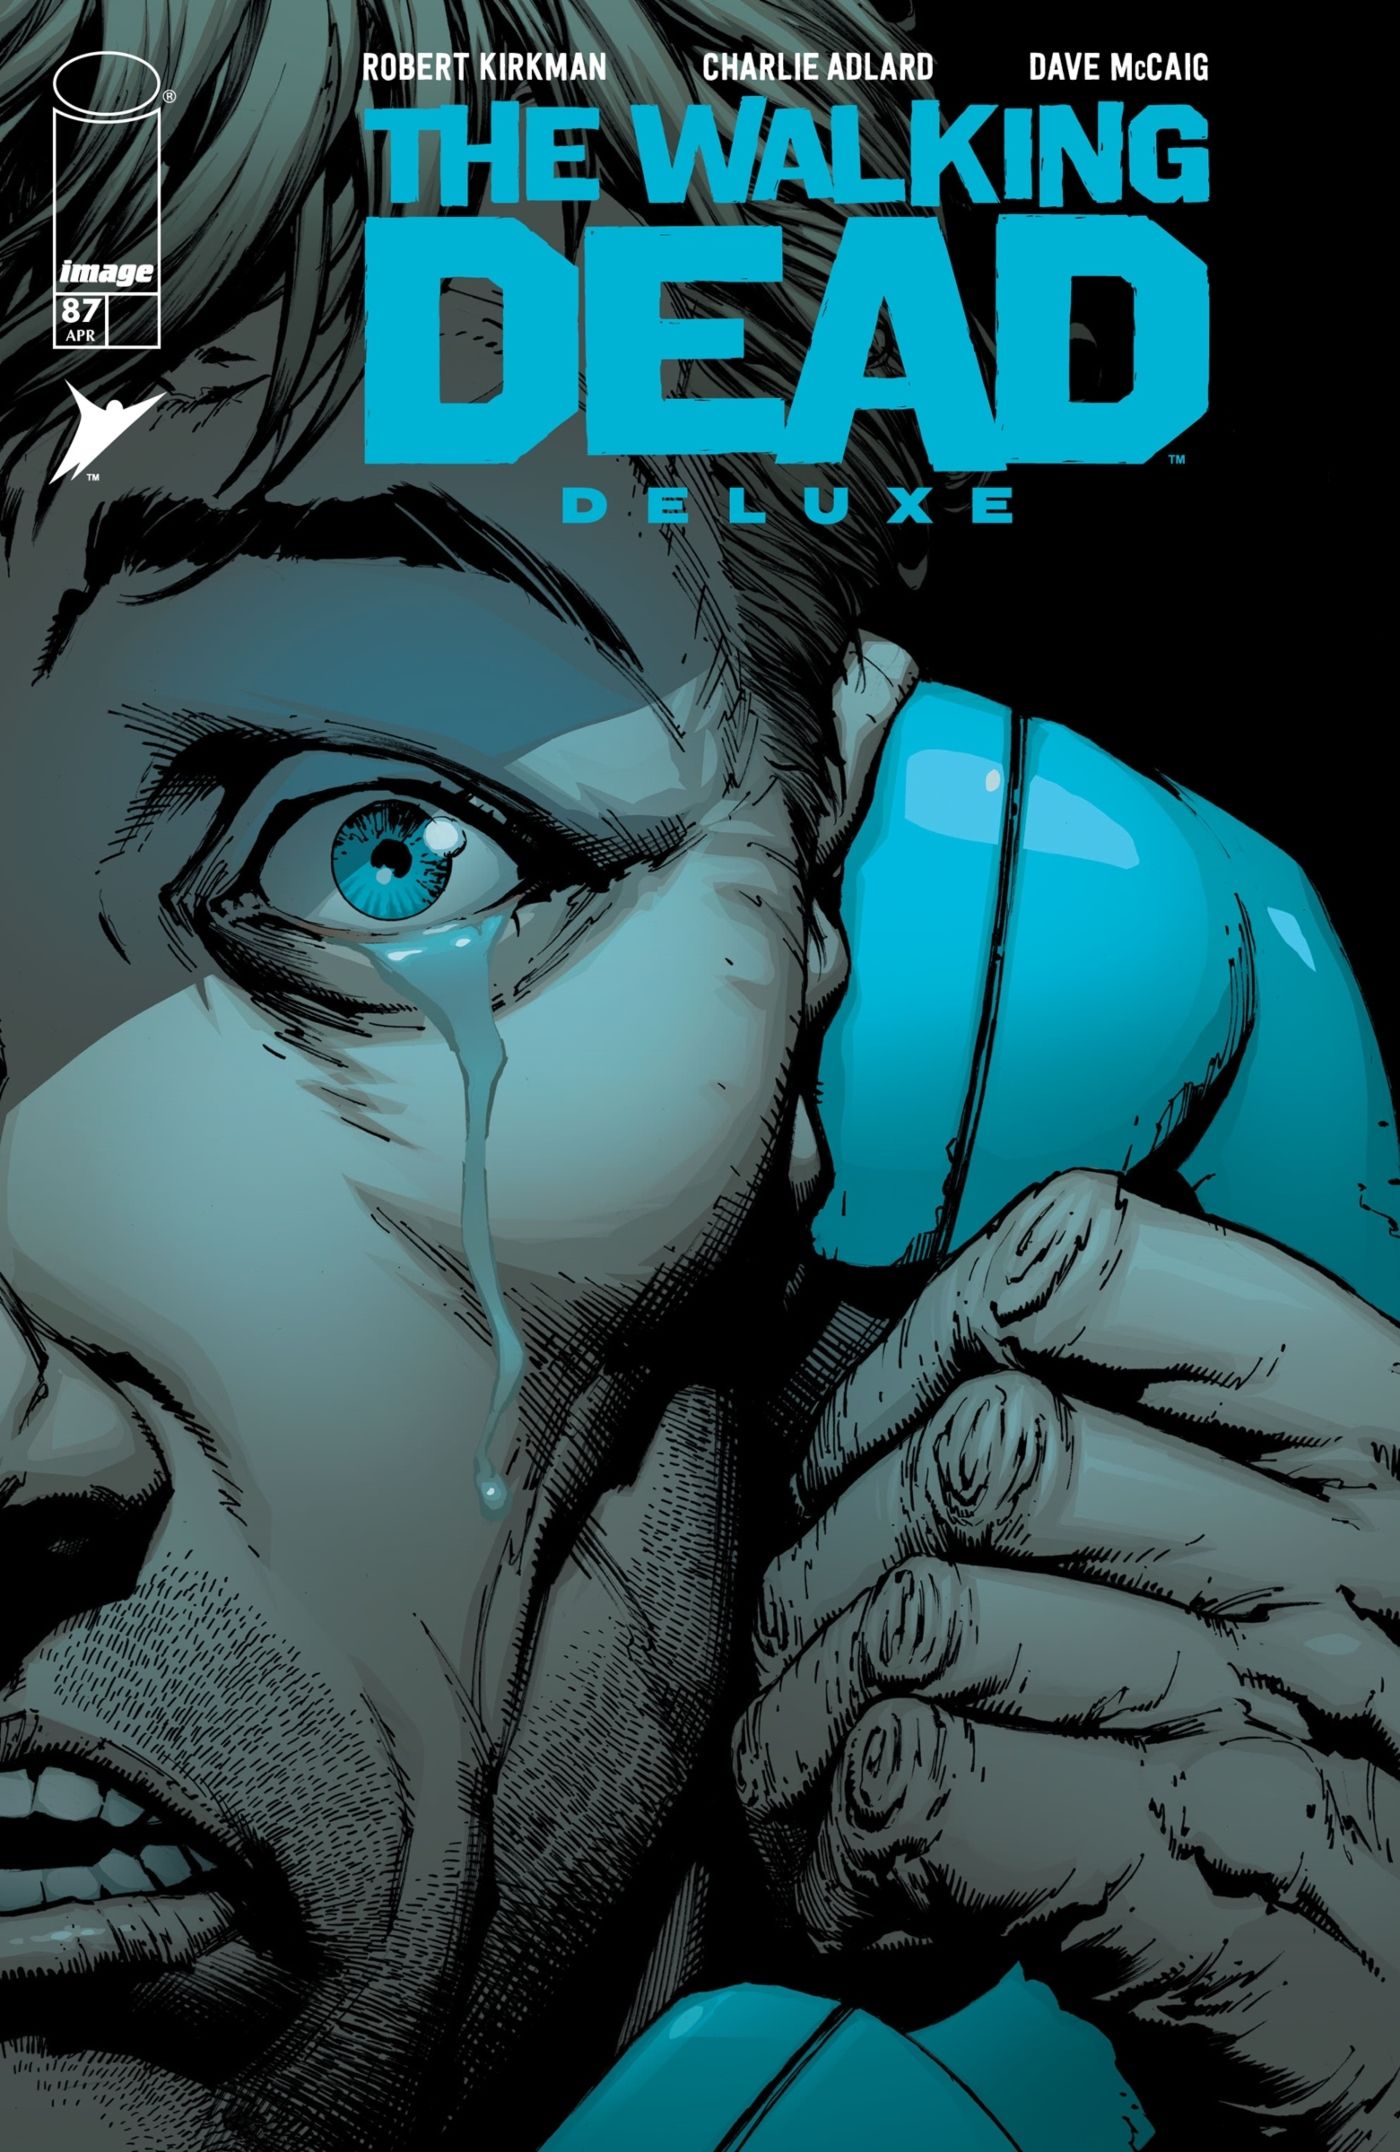 The Walking Dead Deluxe #87 cover featuring Rick crying on the phone.